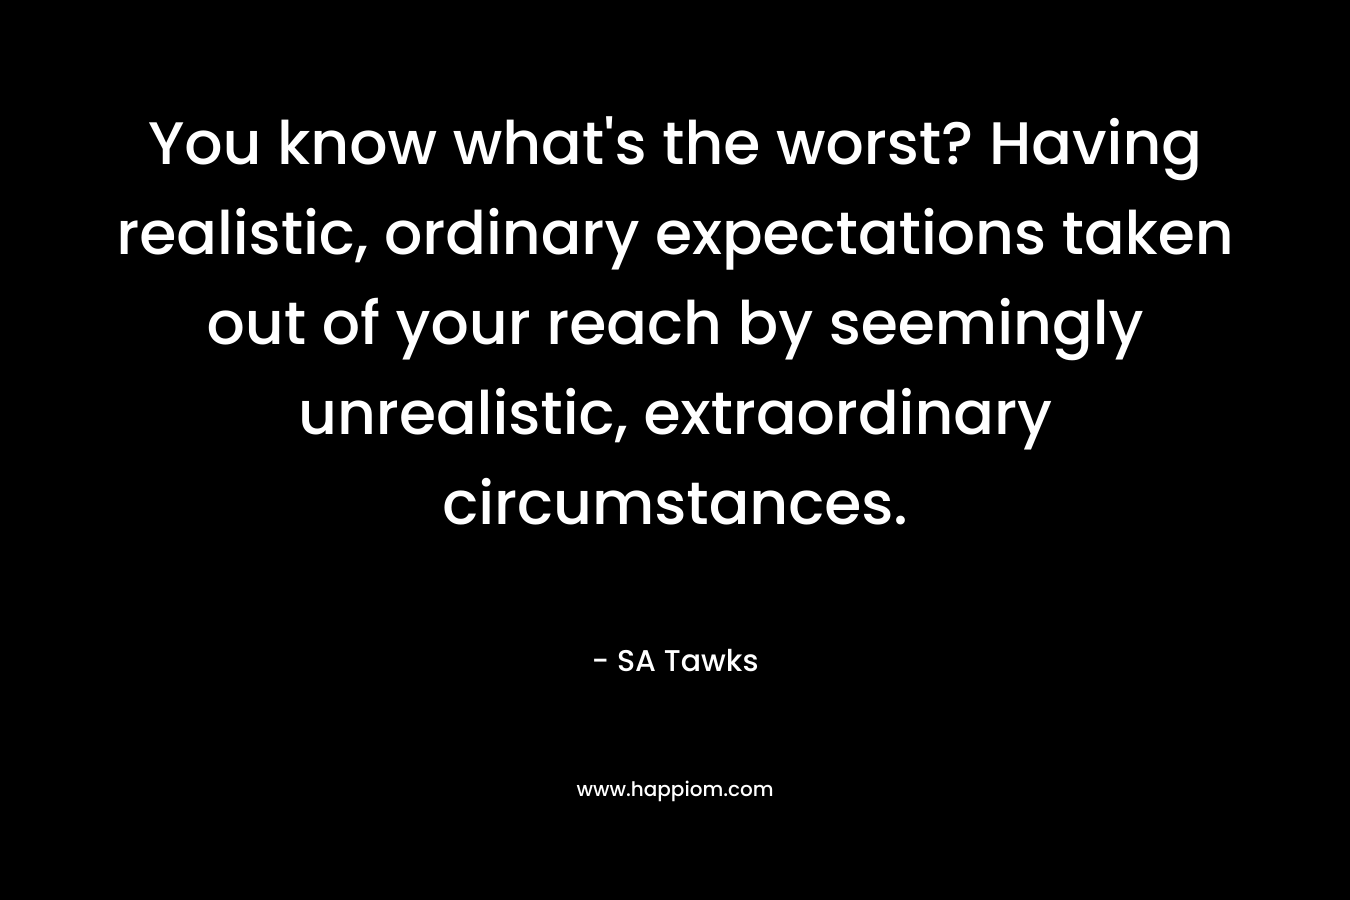 You know what's the worst? Having realistic, ordinary expectations taken out of your reach by seemingly unrealistic, extraordinary circumstances.